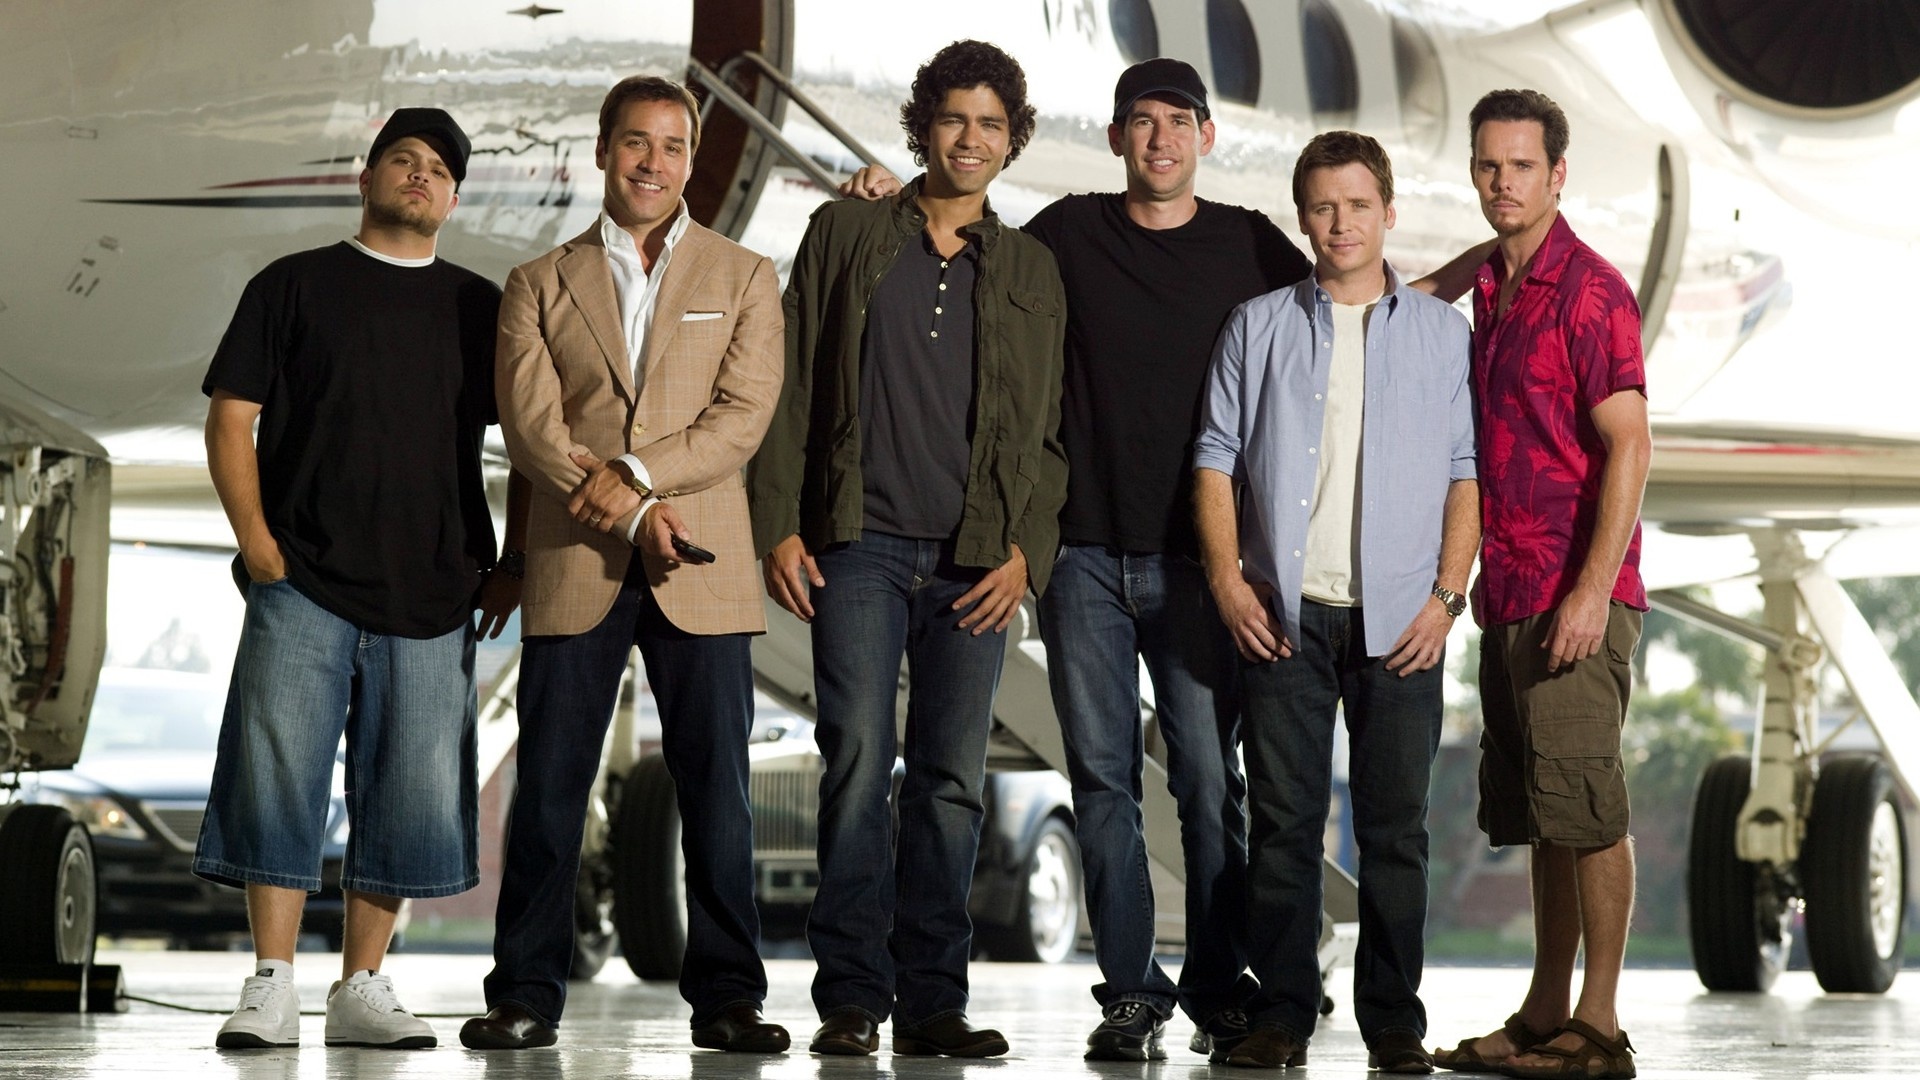 Entourage (TV Series): The hit comedy show produced by Mark Wahlberg that takes a look at the day-to-day life of Vincent Chase. 1920x1080 Full HD Background.